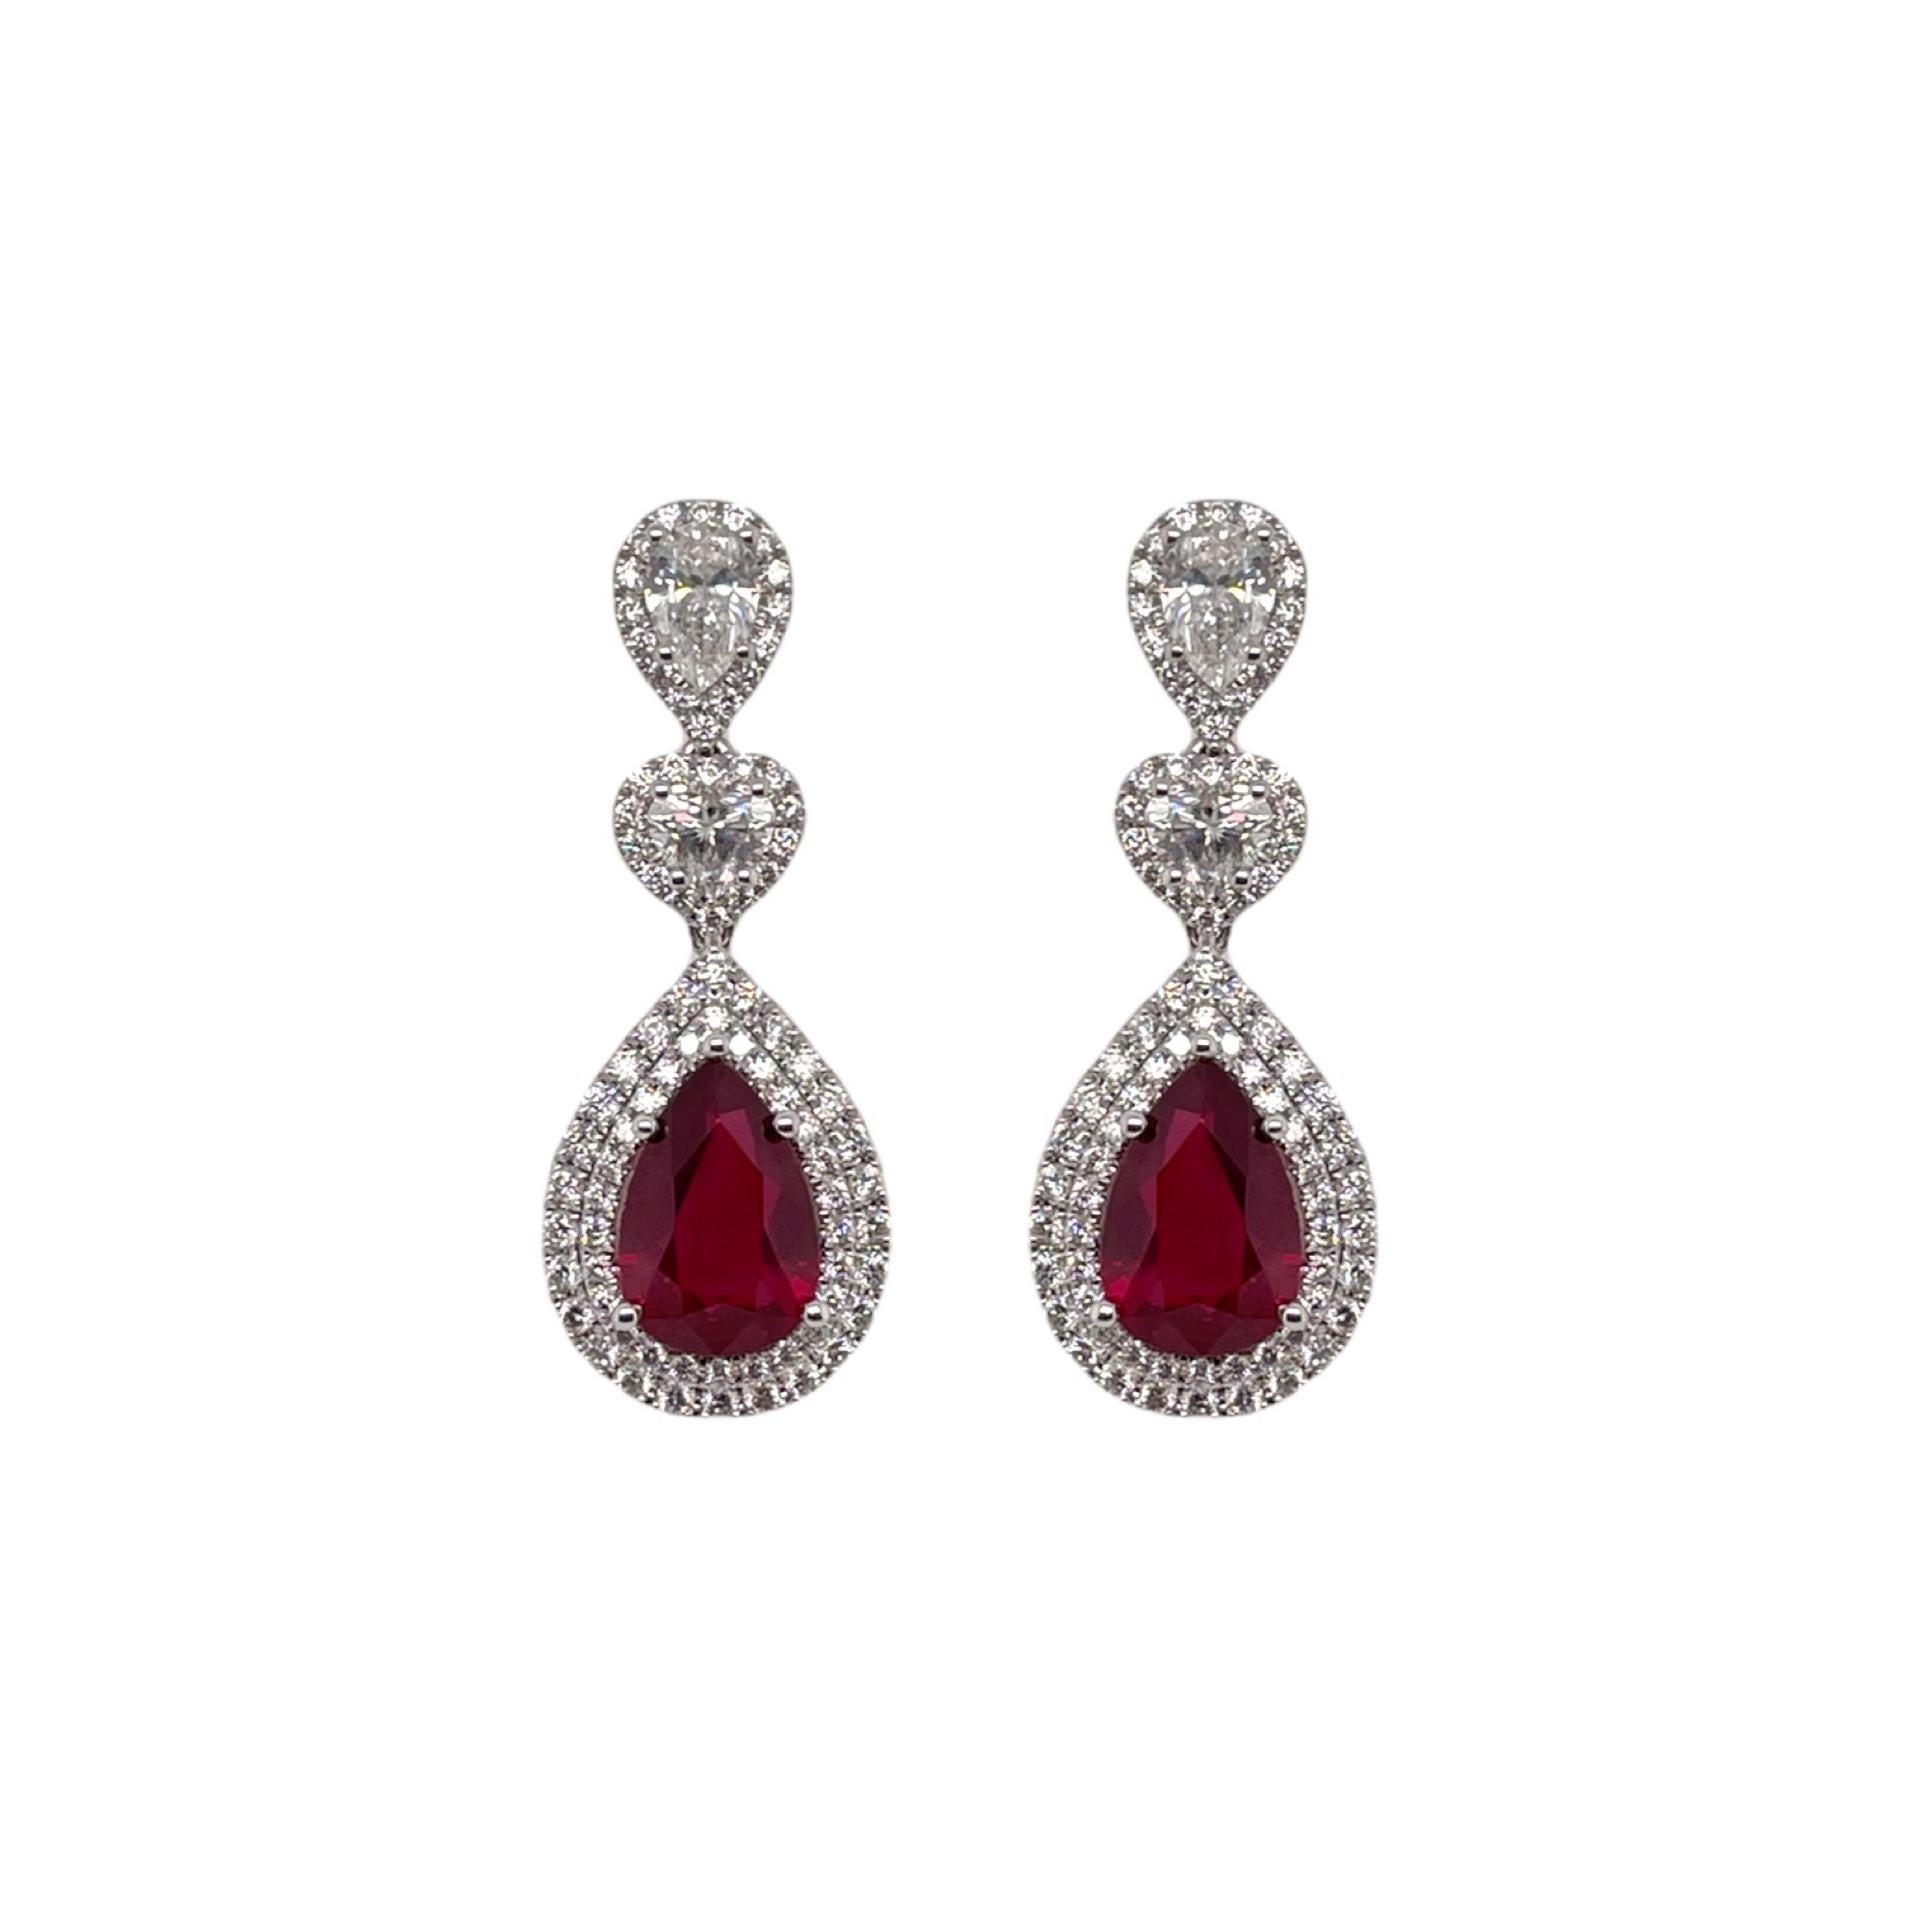 Earrings contain 2 finely matched GIA certified pear shaped rubies, 4.62tcw. Gemstones are surrounded by a double row of round brilliant diamonds and accented by a pear and heart shape diamond drop, 2.00tcw. Diamonds are colorless and VS2 in